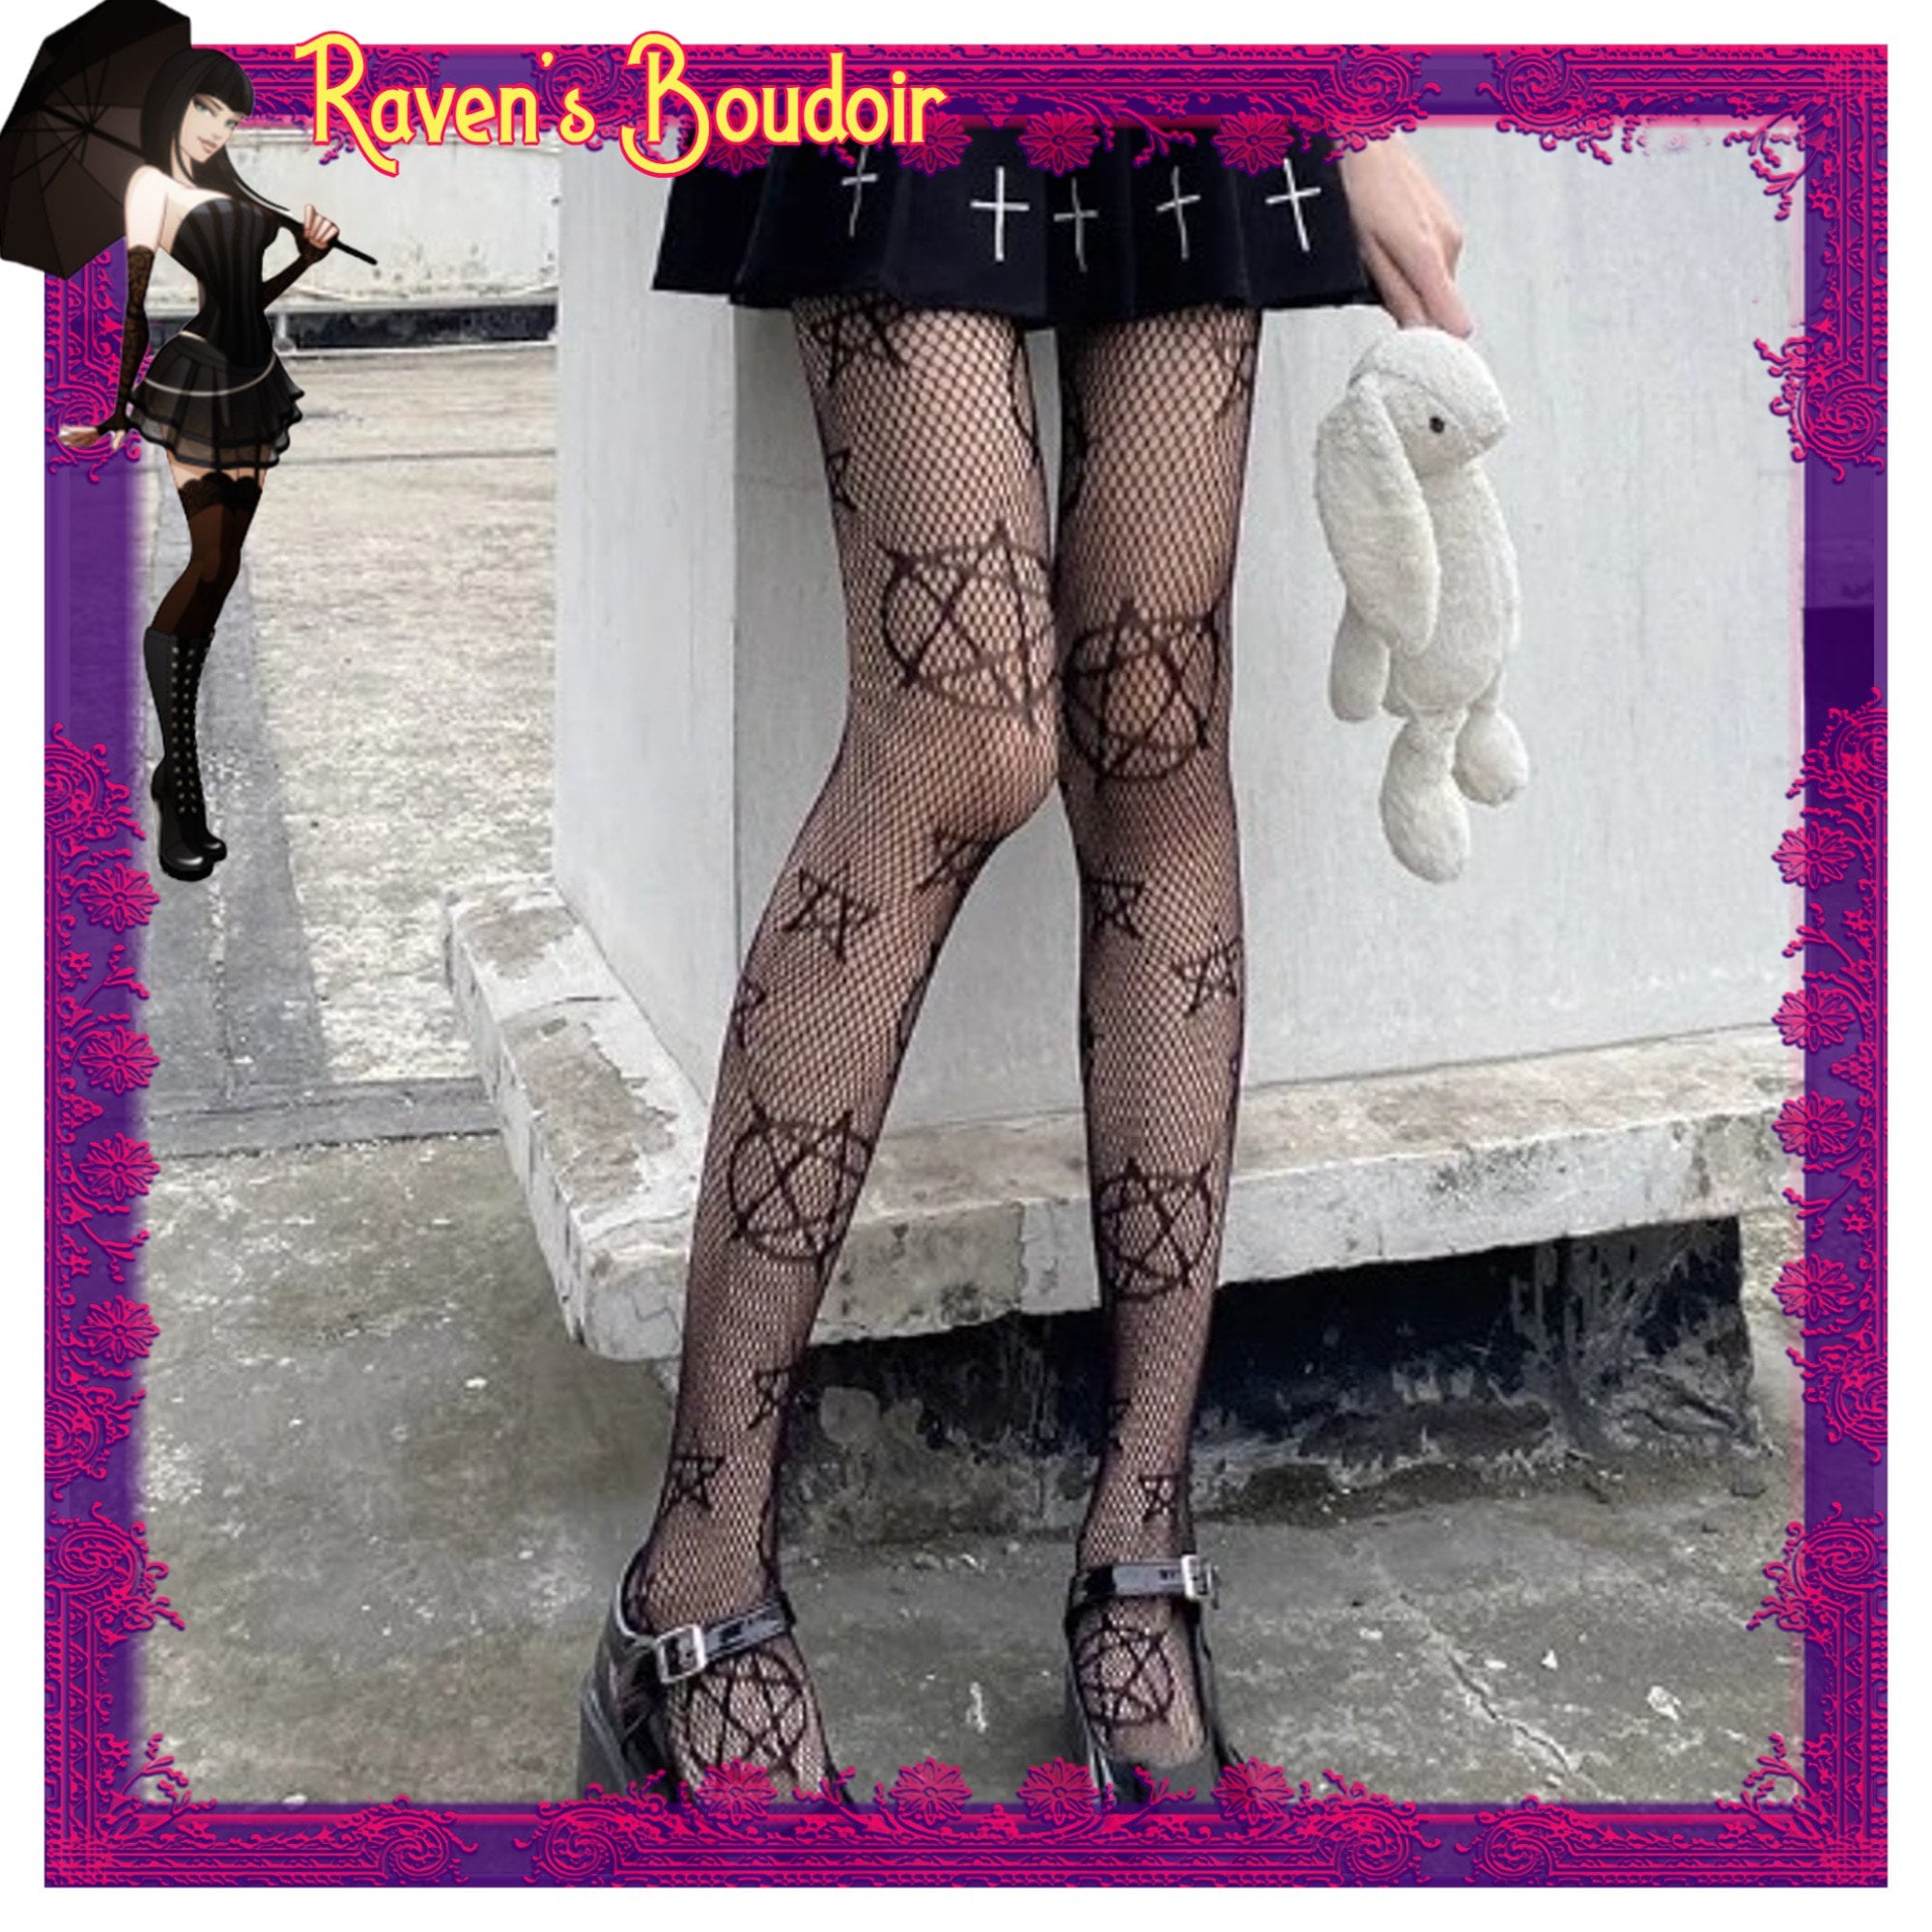 Red Black Fishnet Tights Fishnet Stockings Double Layered Tattered